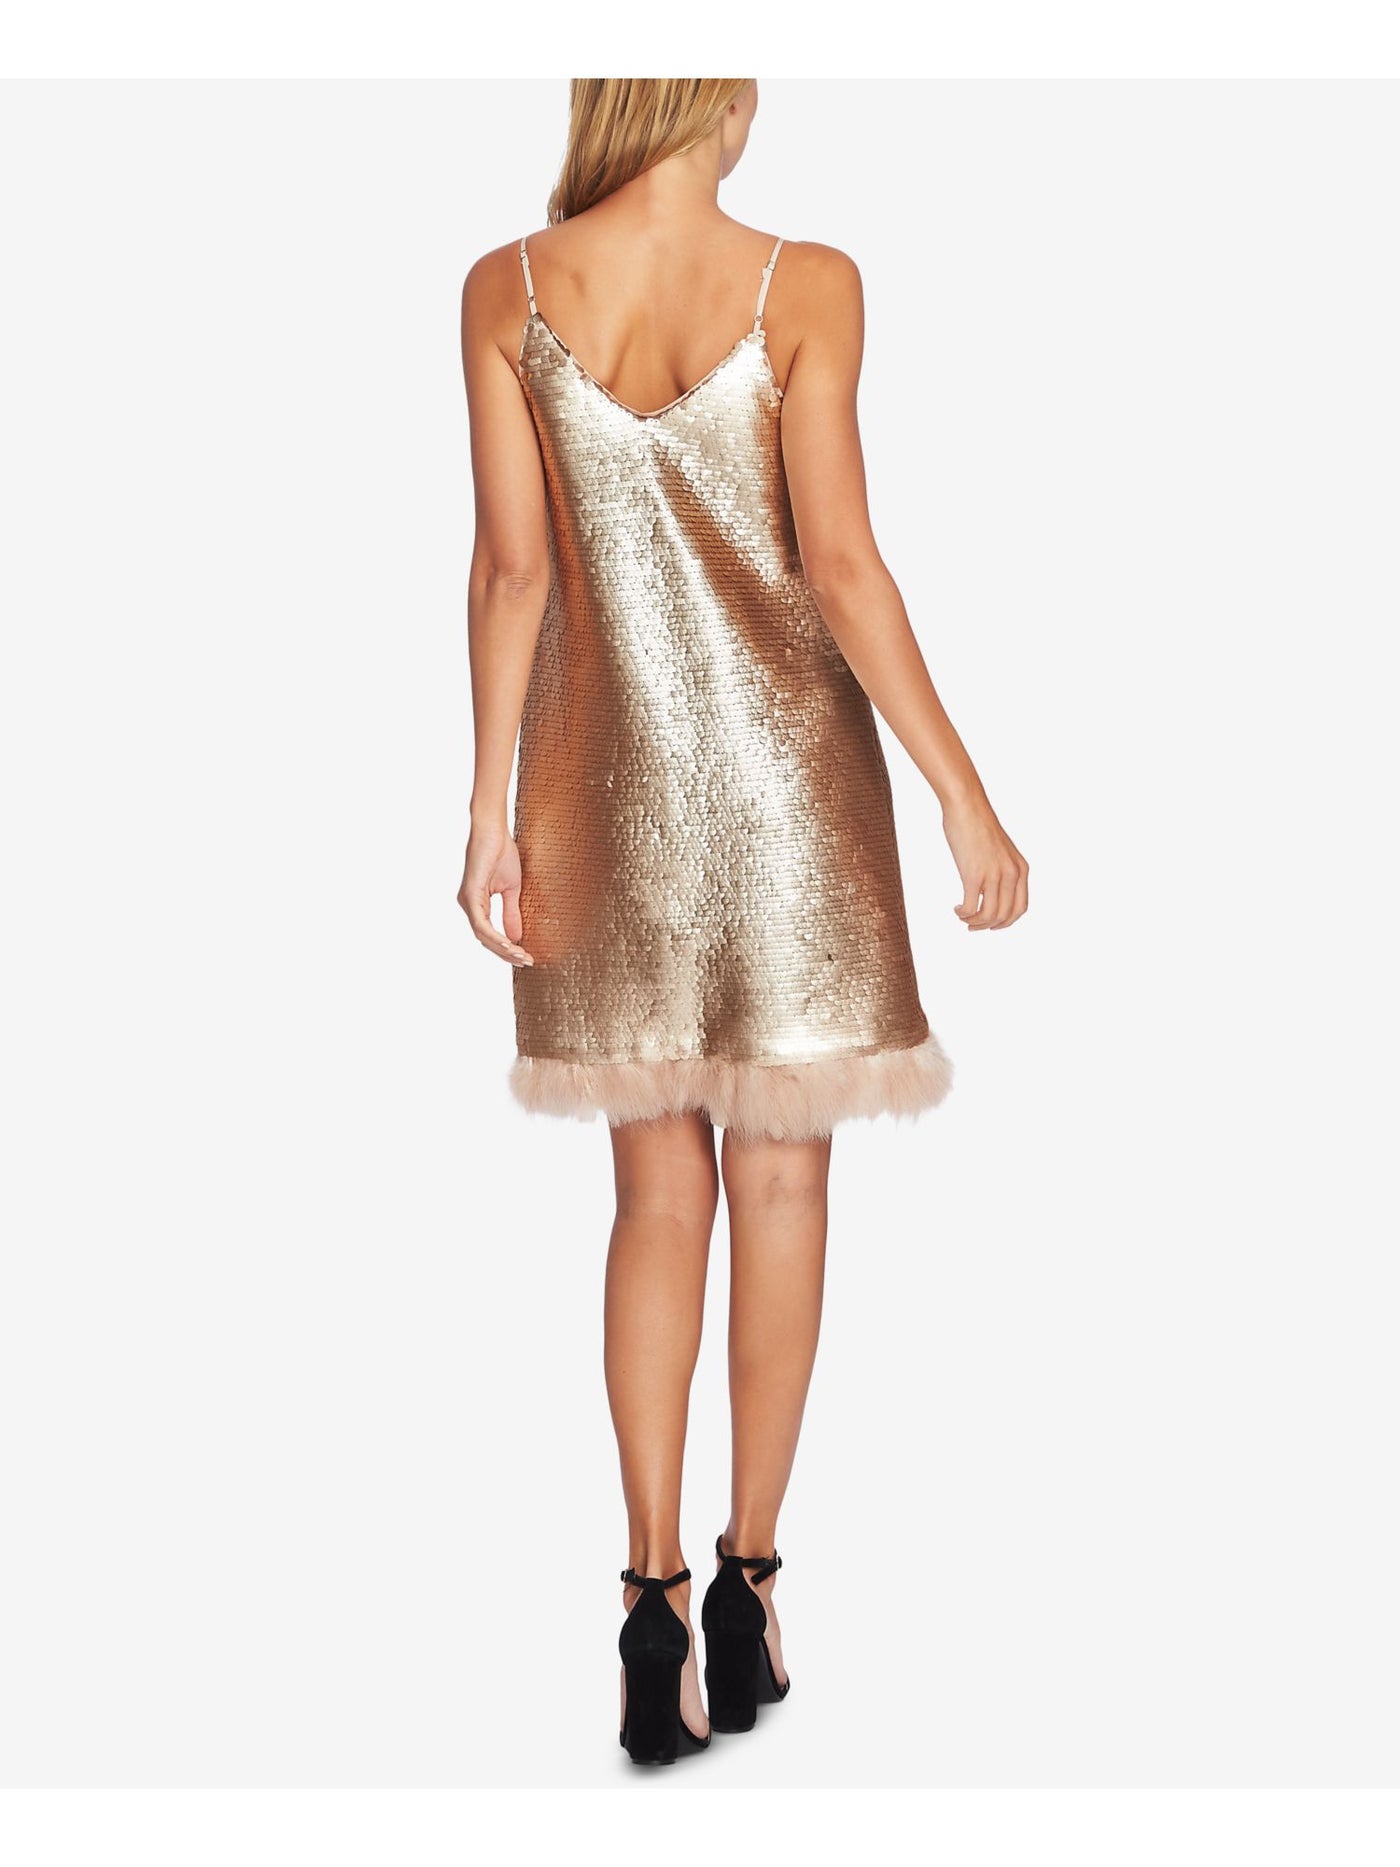 CECE Womens Gold Sequined Feather Trim Spaghetti Strap V Neck Above The Knee Shift Dress 10